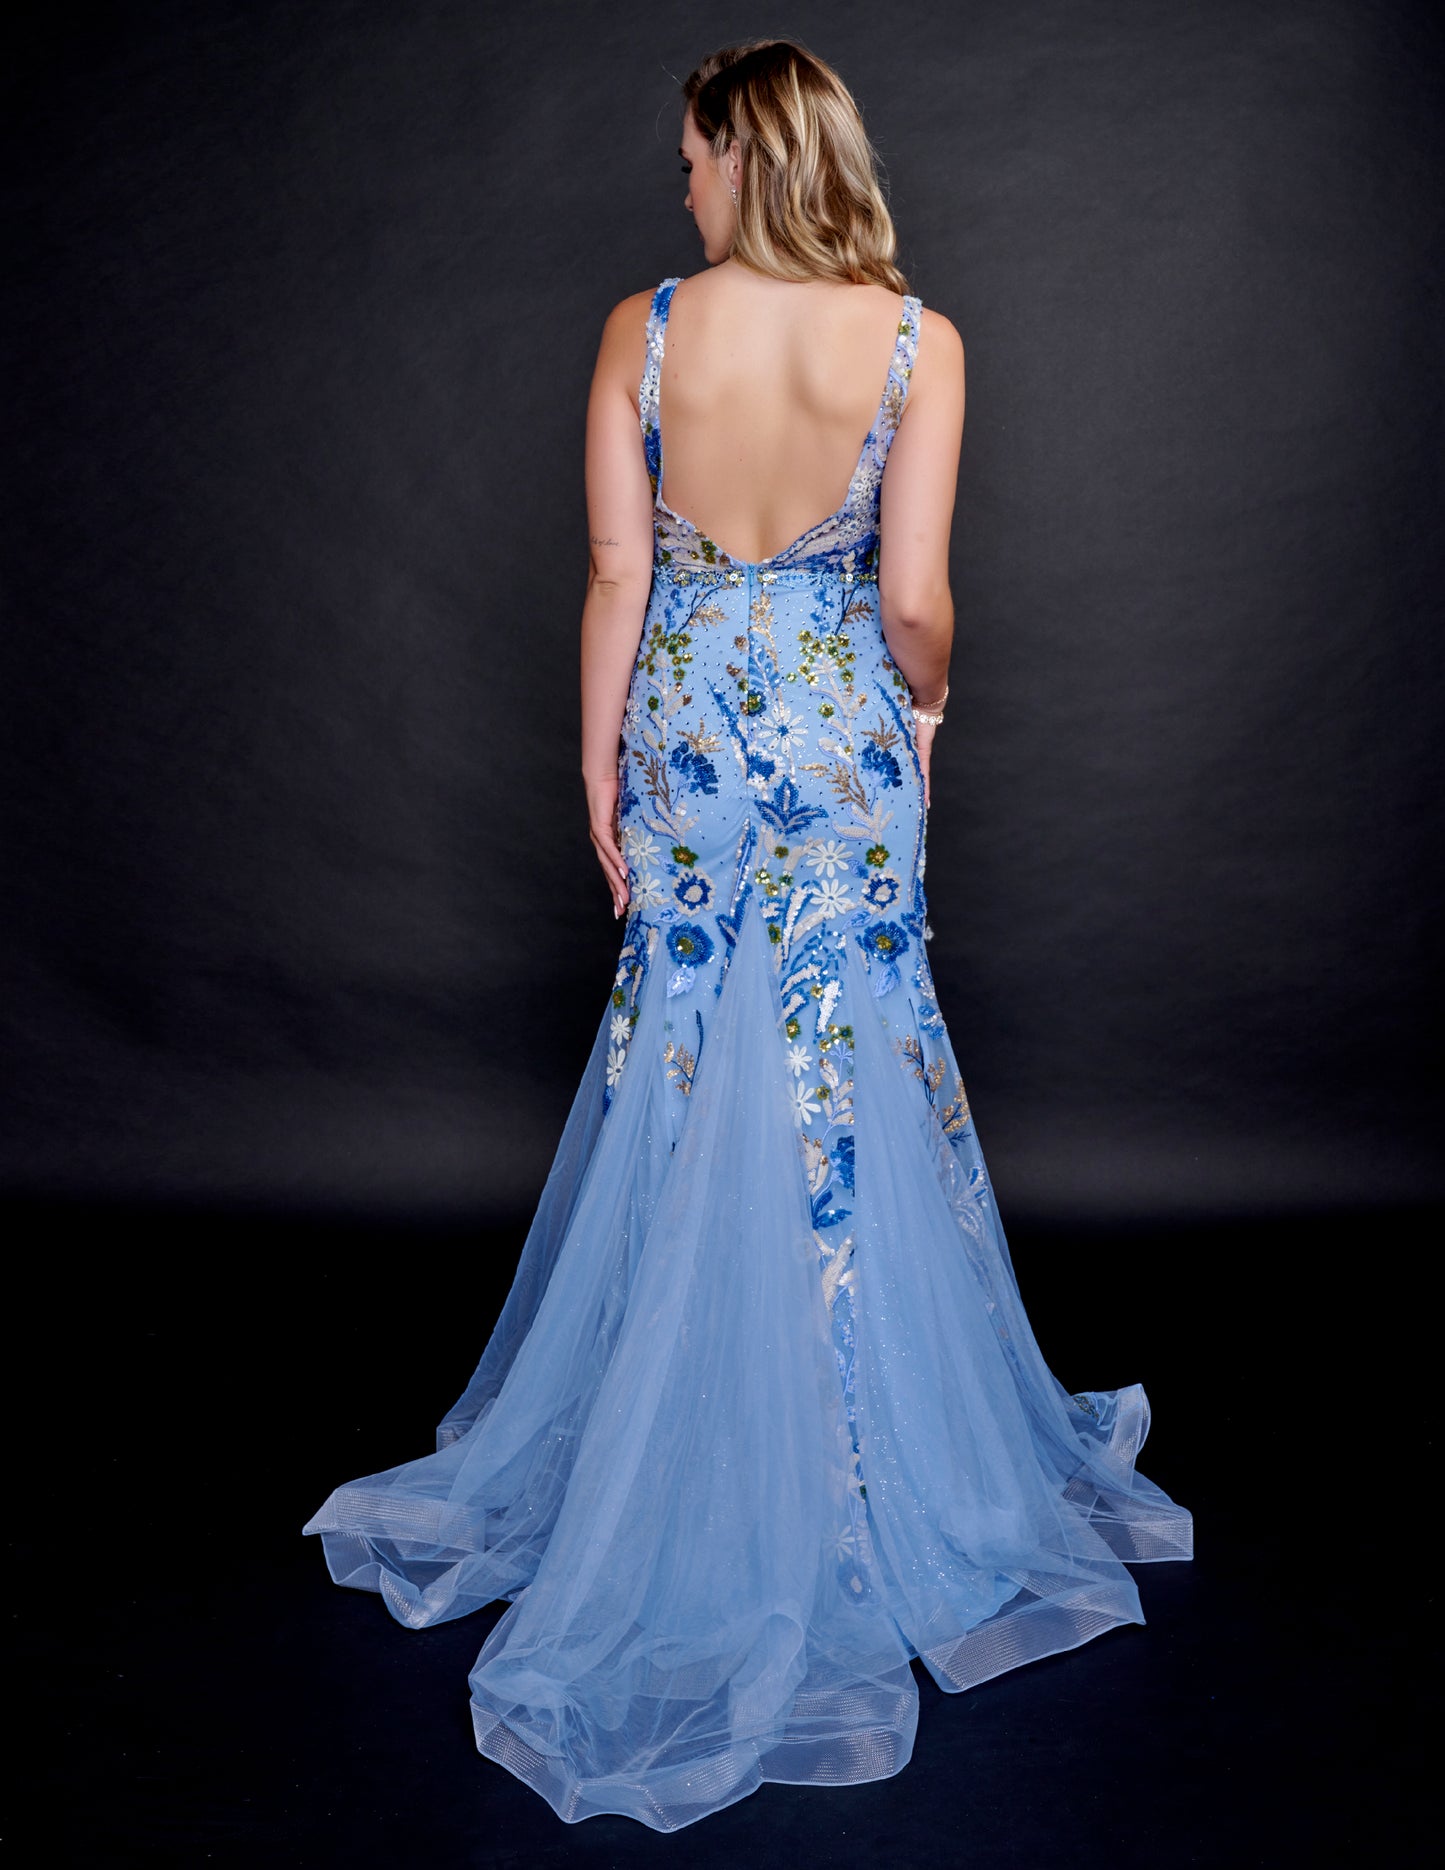 Nina Canacci 8215 Blue Floral Sequins Print Prom Dress with V neckline mermaid skirt with tulle godets and backless